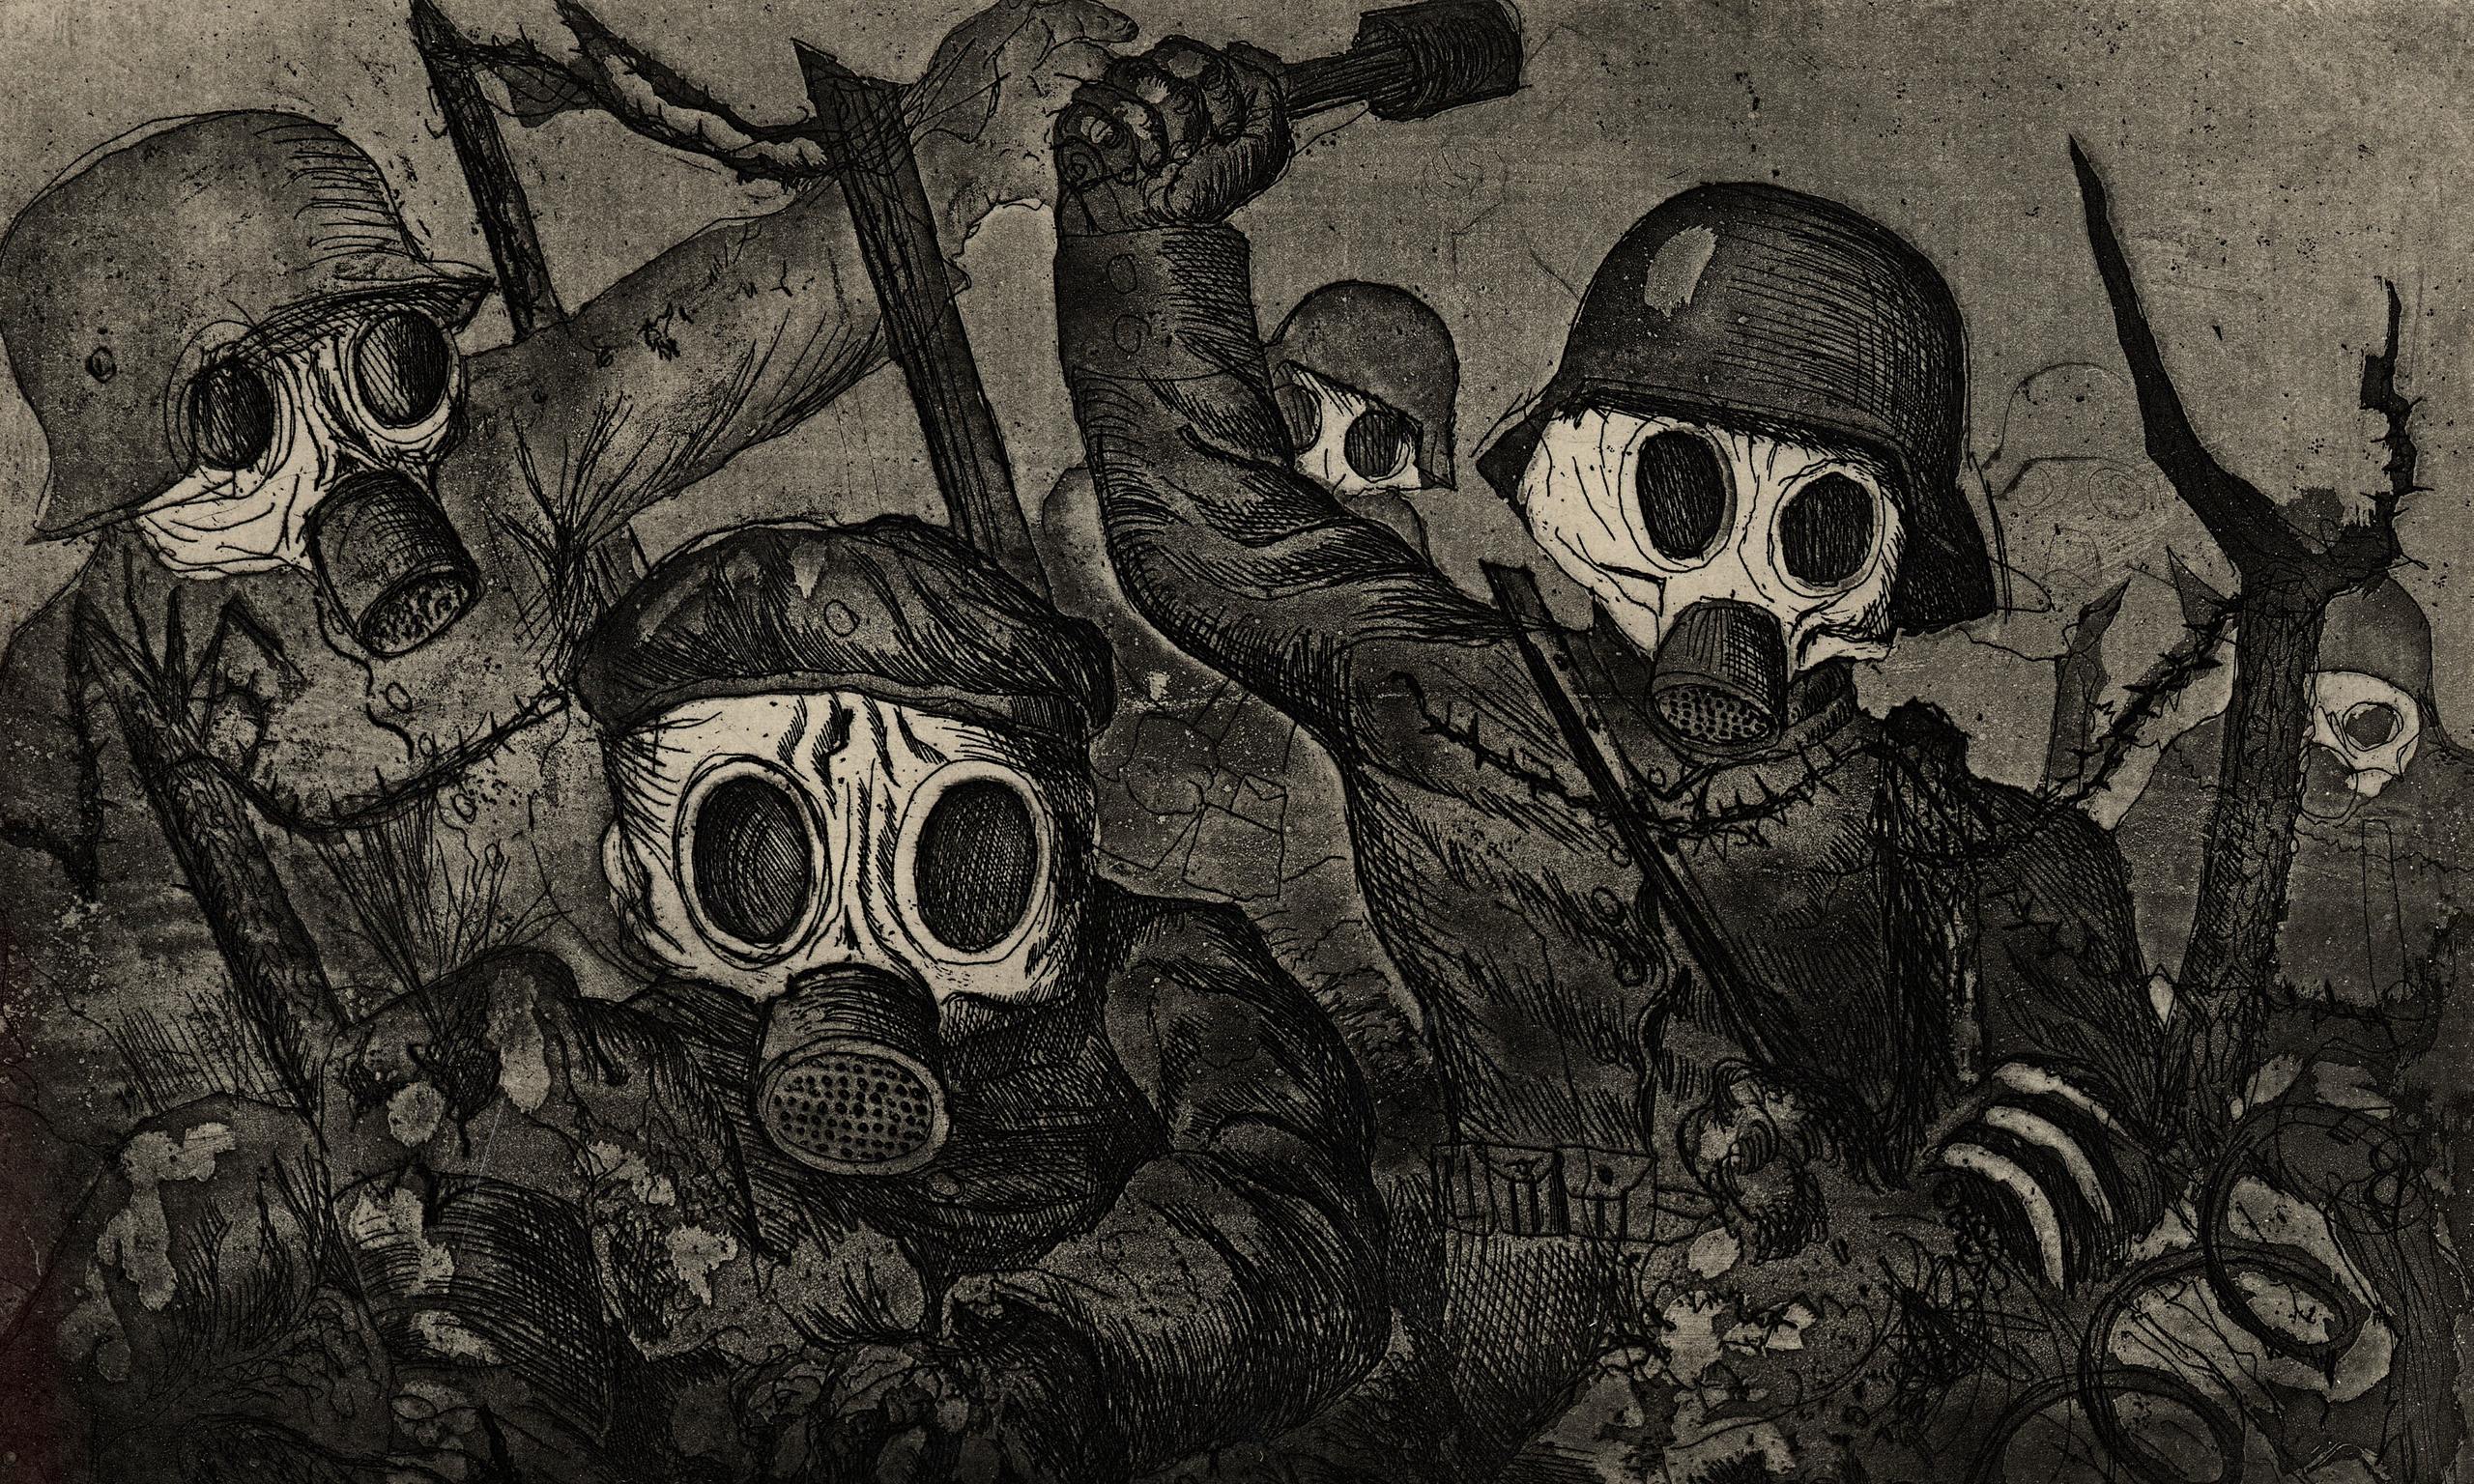 Shock Troops Advance under Gas by Otto Dix - 1924 - 19.3 x 28.8 cm Museum of Modern Art